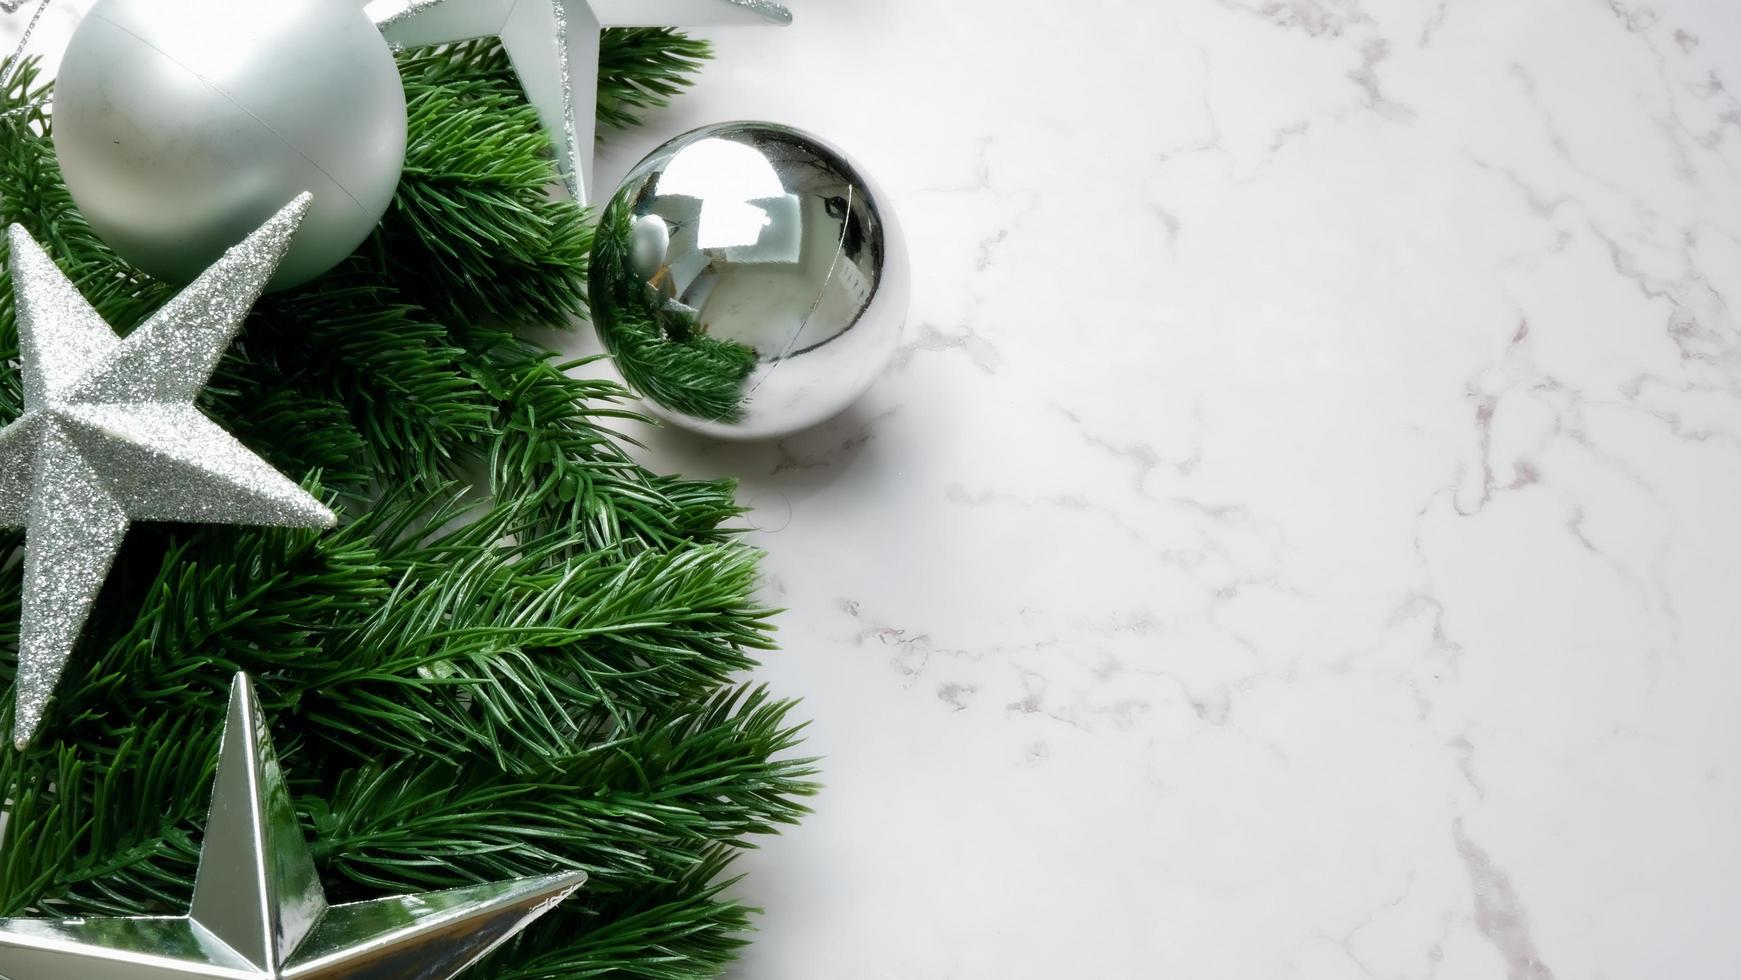 Green pine tree leaves on white marble background, christmas decorations in bright silver color. Simple and creative christmas concept. photo